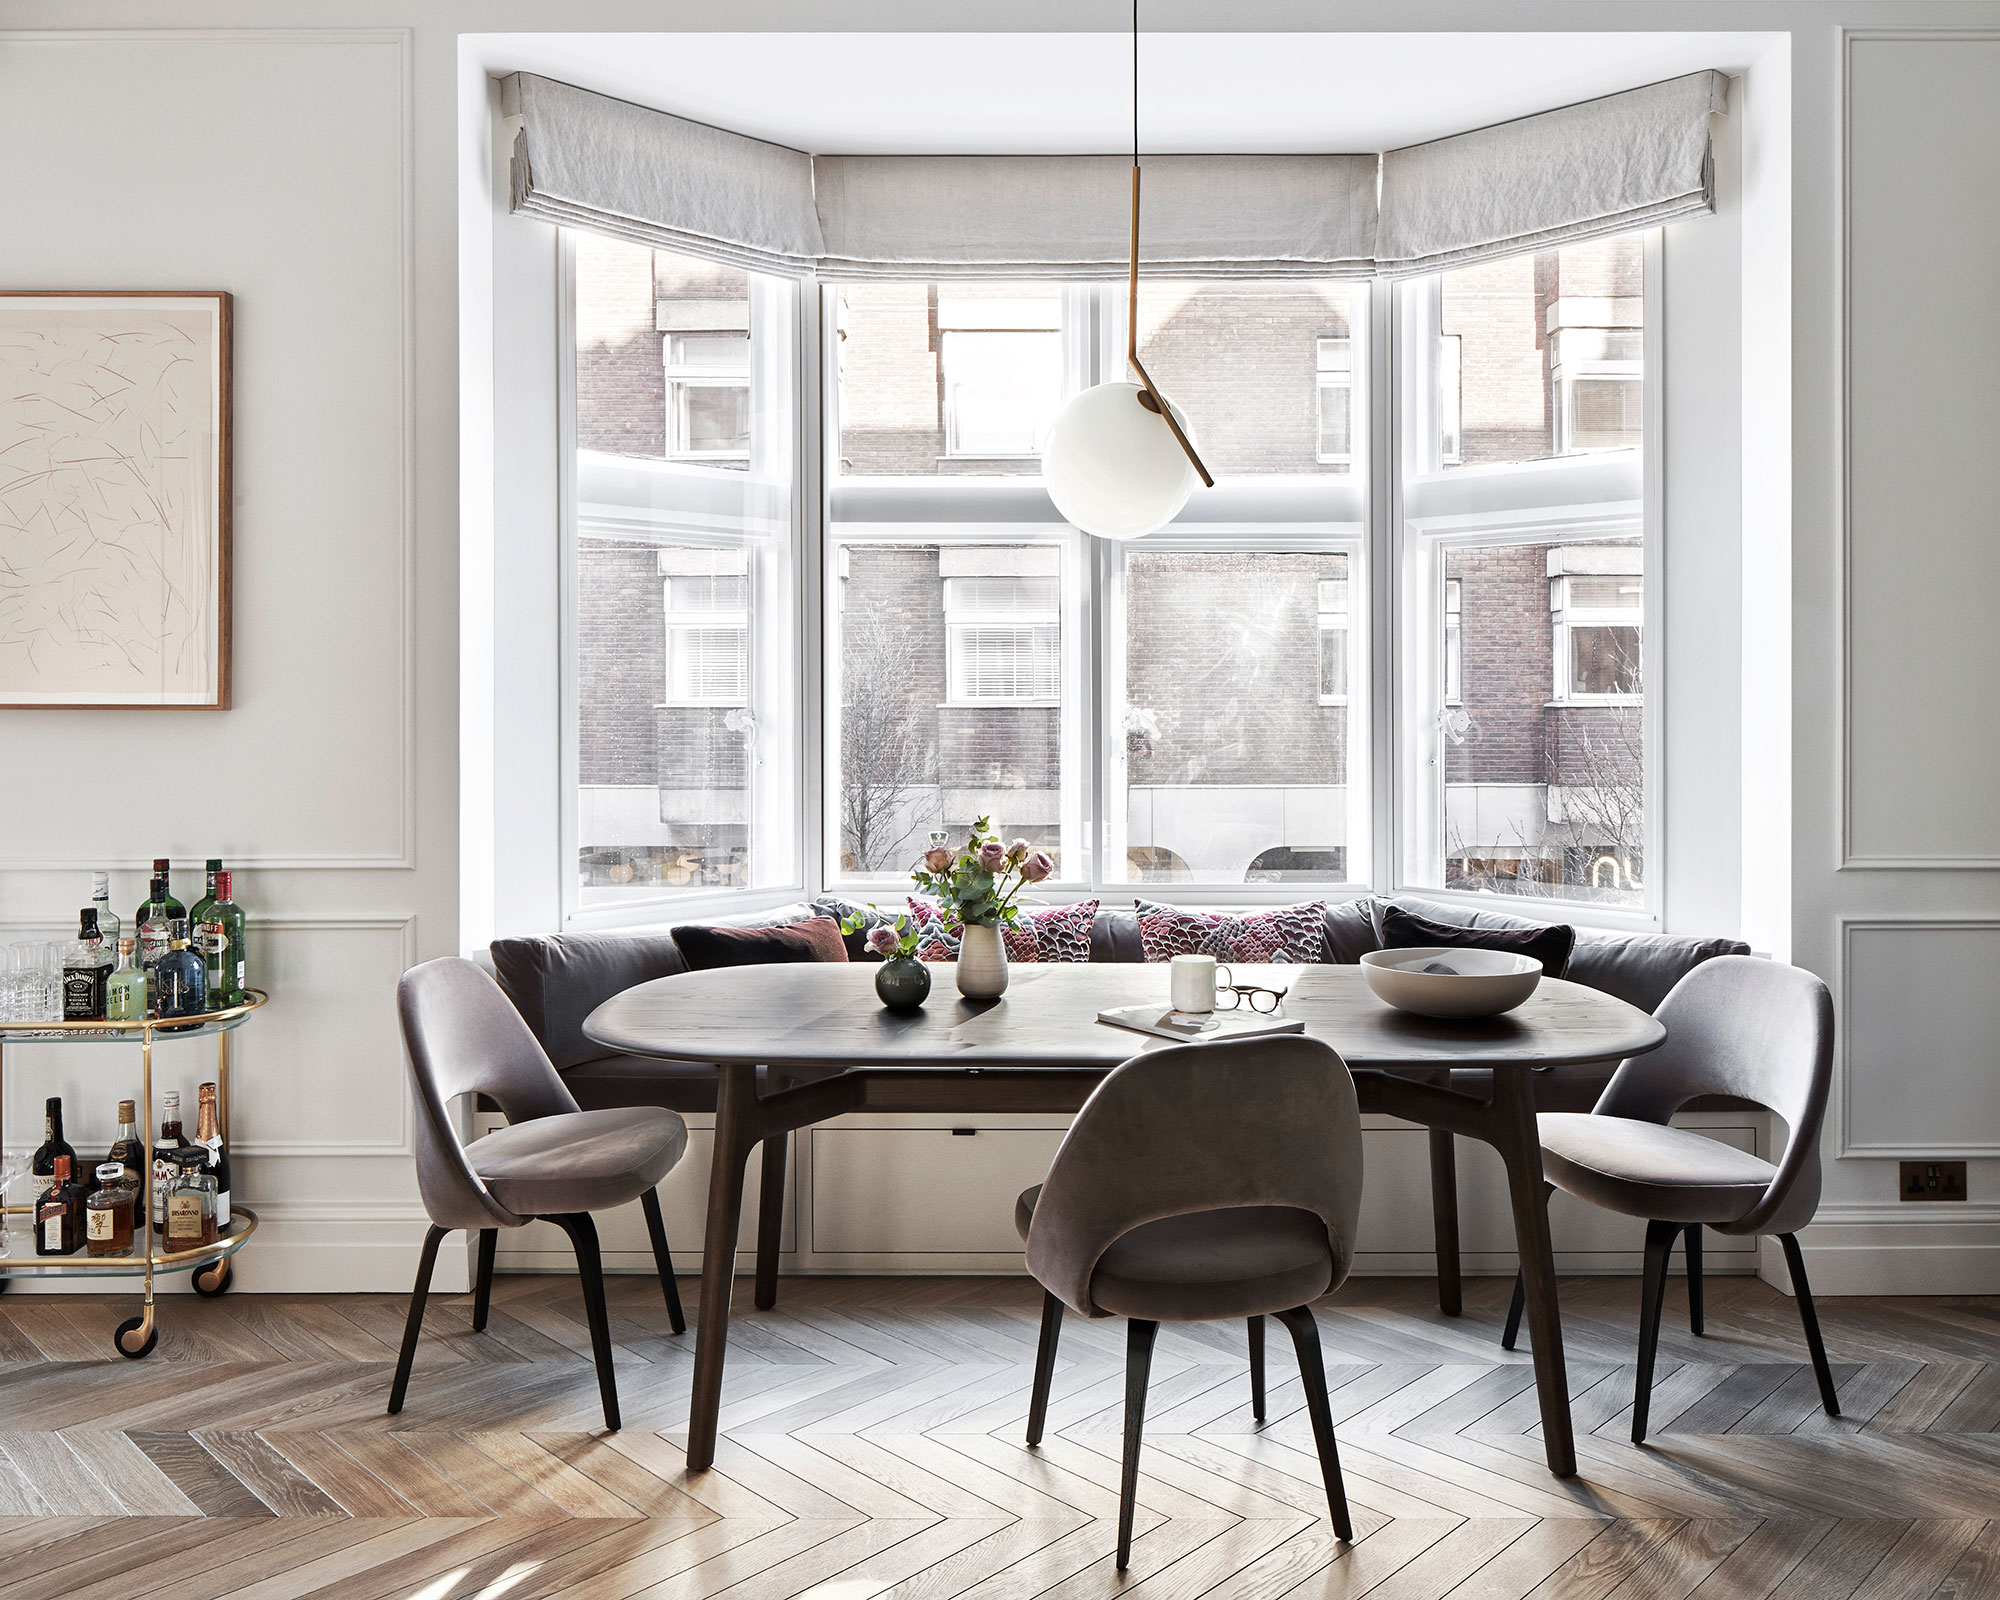 Dining room ideas with window seat and armless chairs